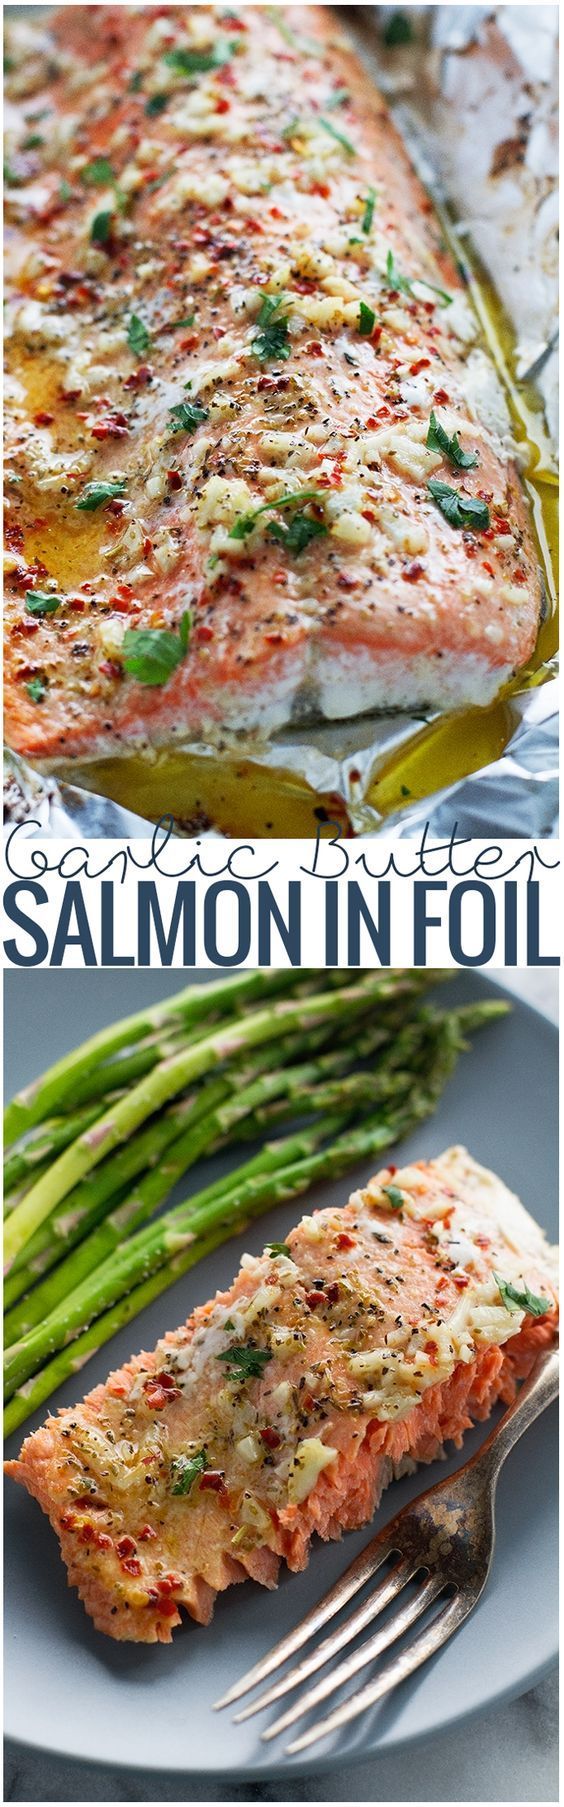 Garlic Butter Baked Salmon In Foil Recipe plus 24 more of the most popular pinned Paleo recipes